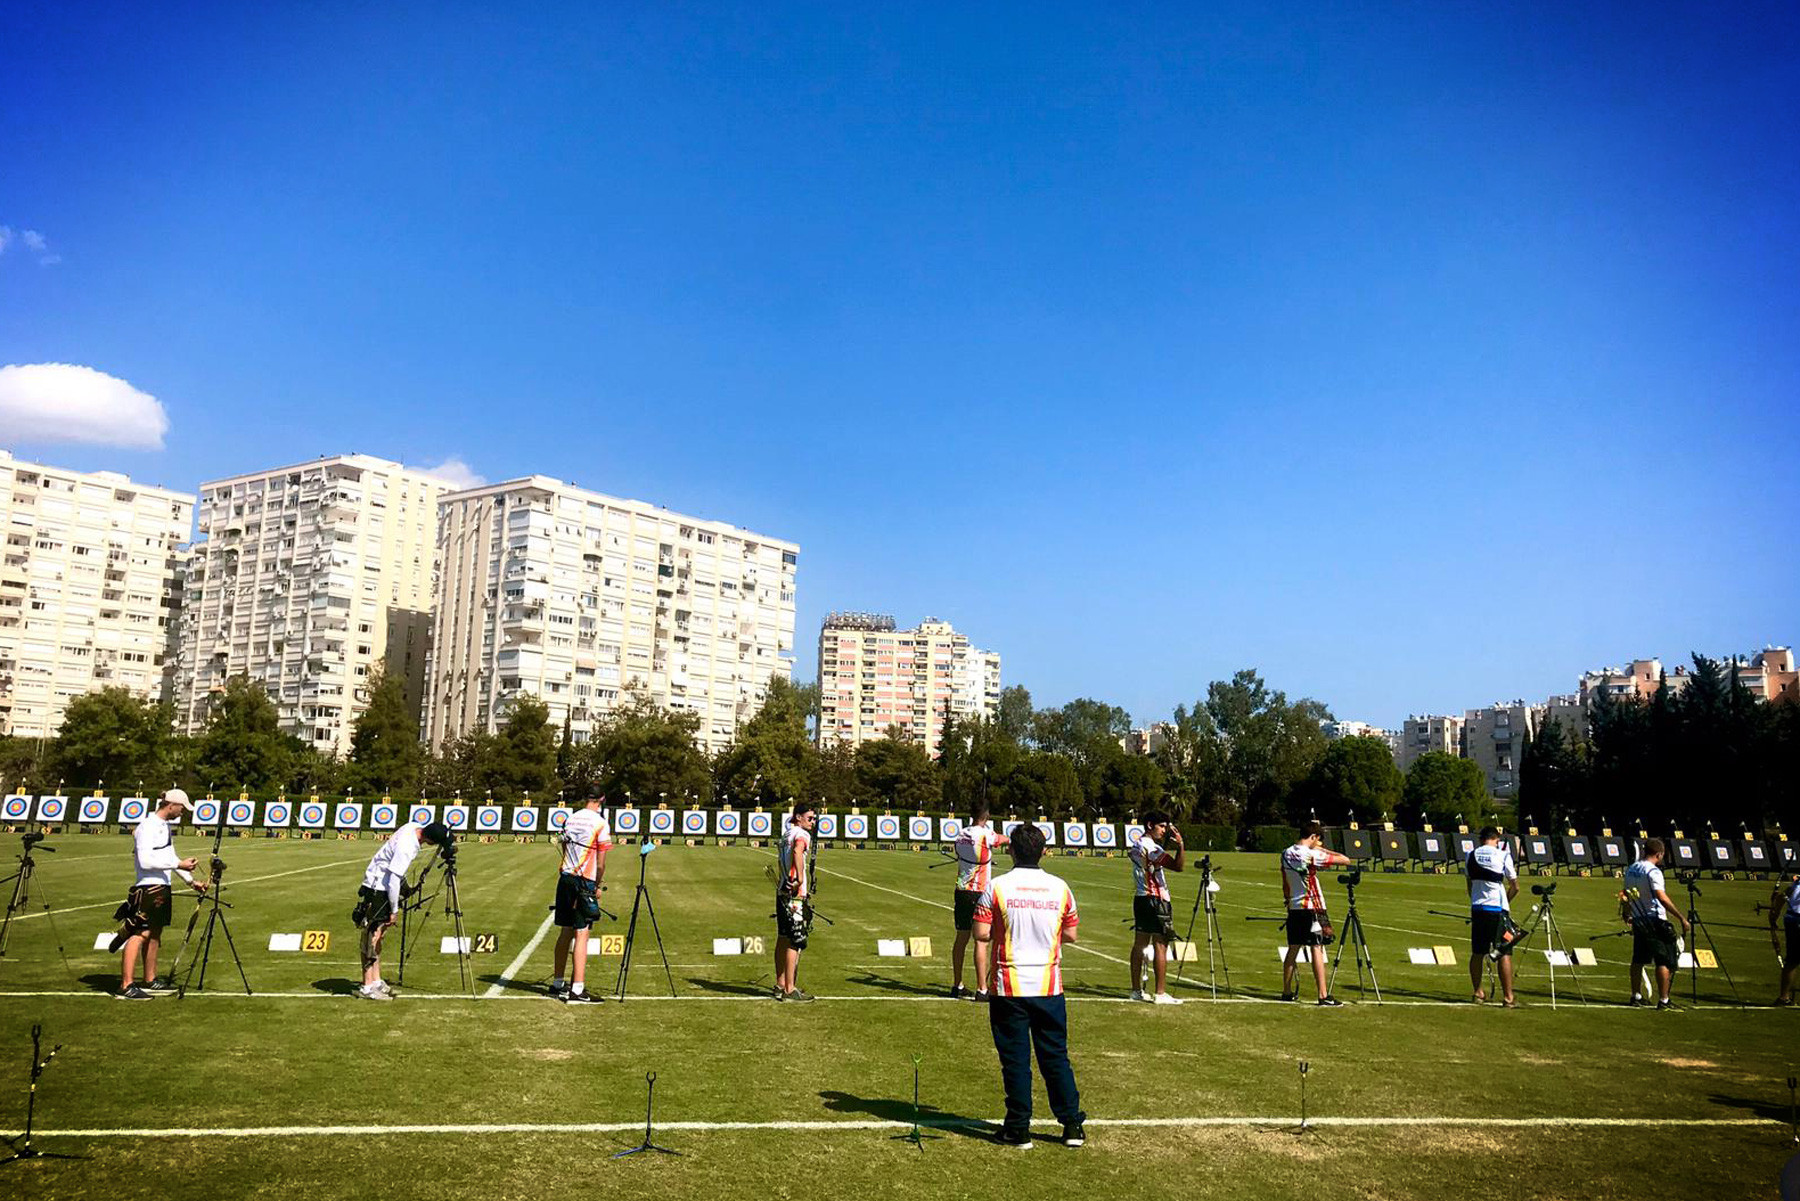 Archery’s first world ranking event since start of COVID-19 pandemic begins in Antalya